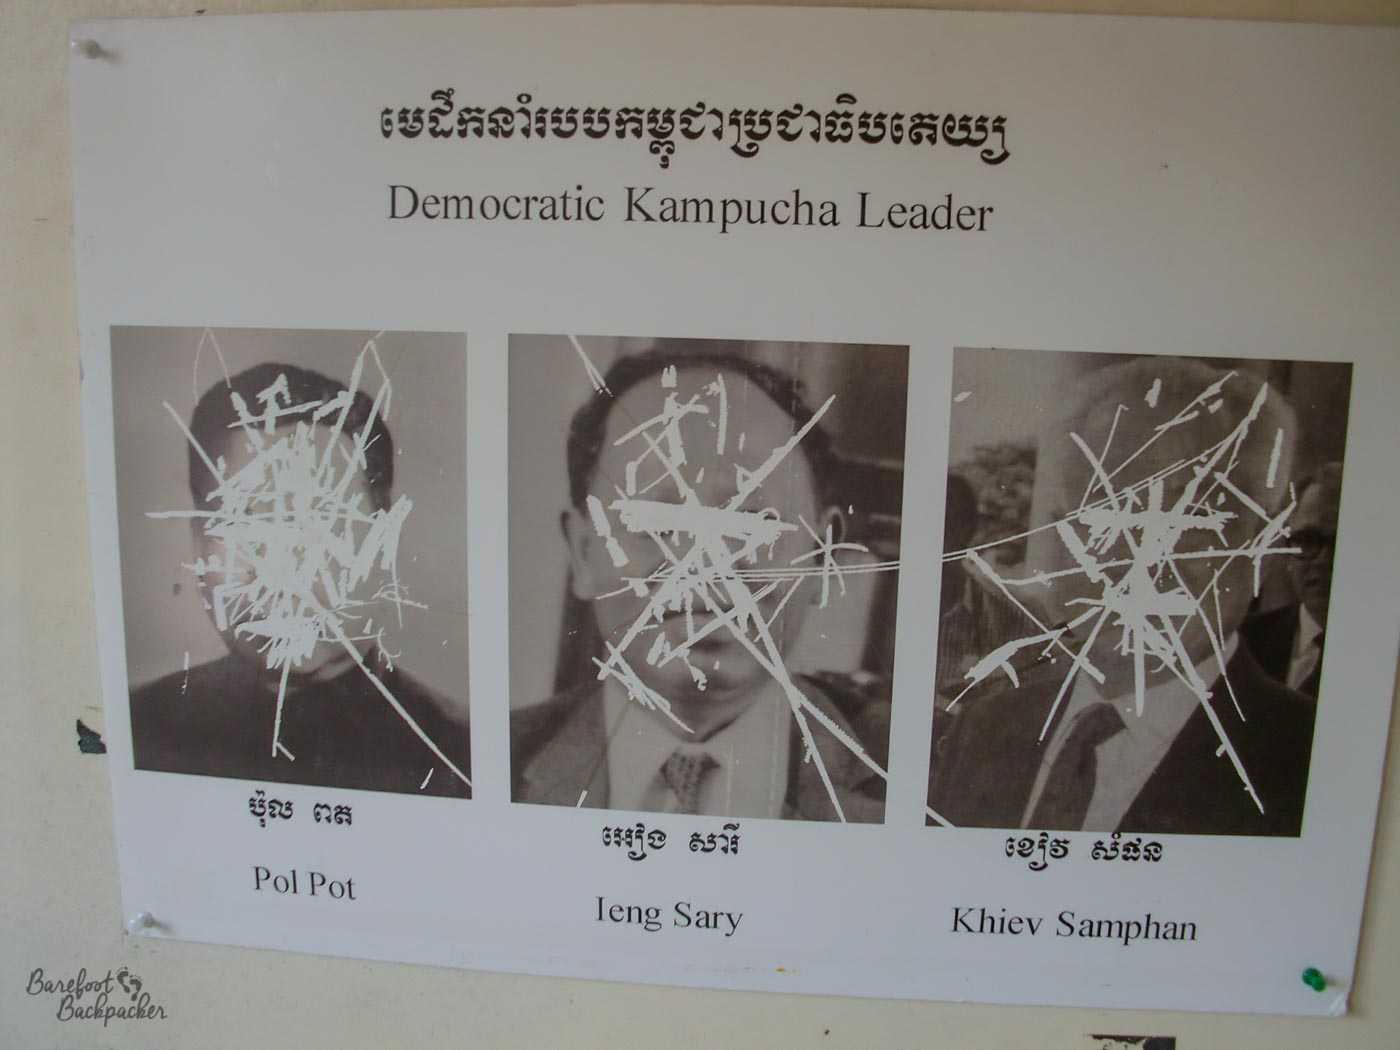 Photos of three of the 'Democratic Kampucha Leader', as it says: Pol Pot, Ieng Sary, and Khiev Samphan. Their faces have been nearly obliterated with scratches.